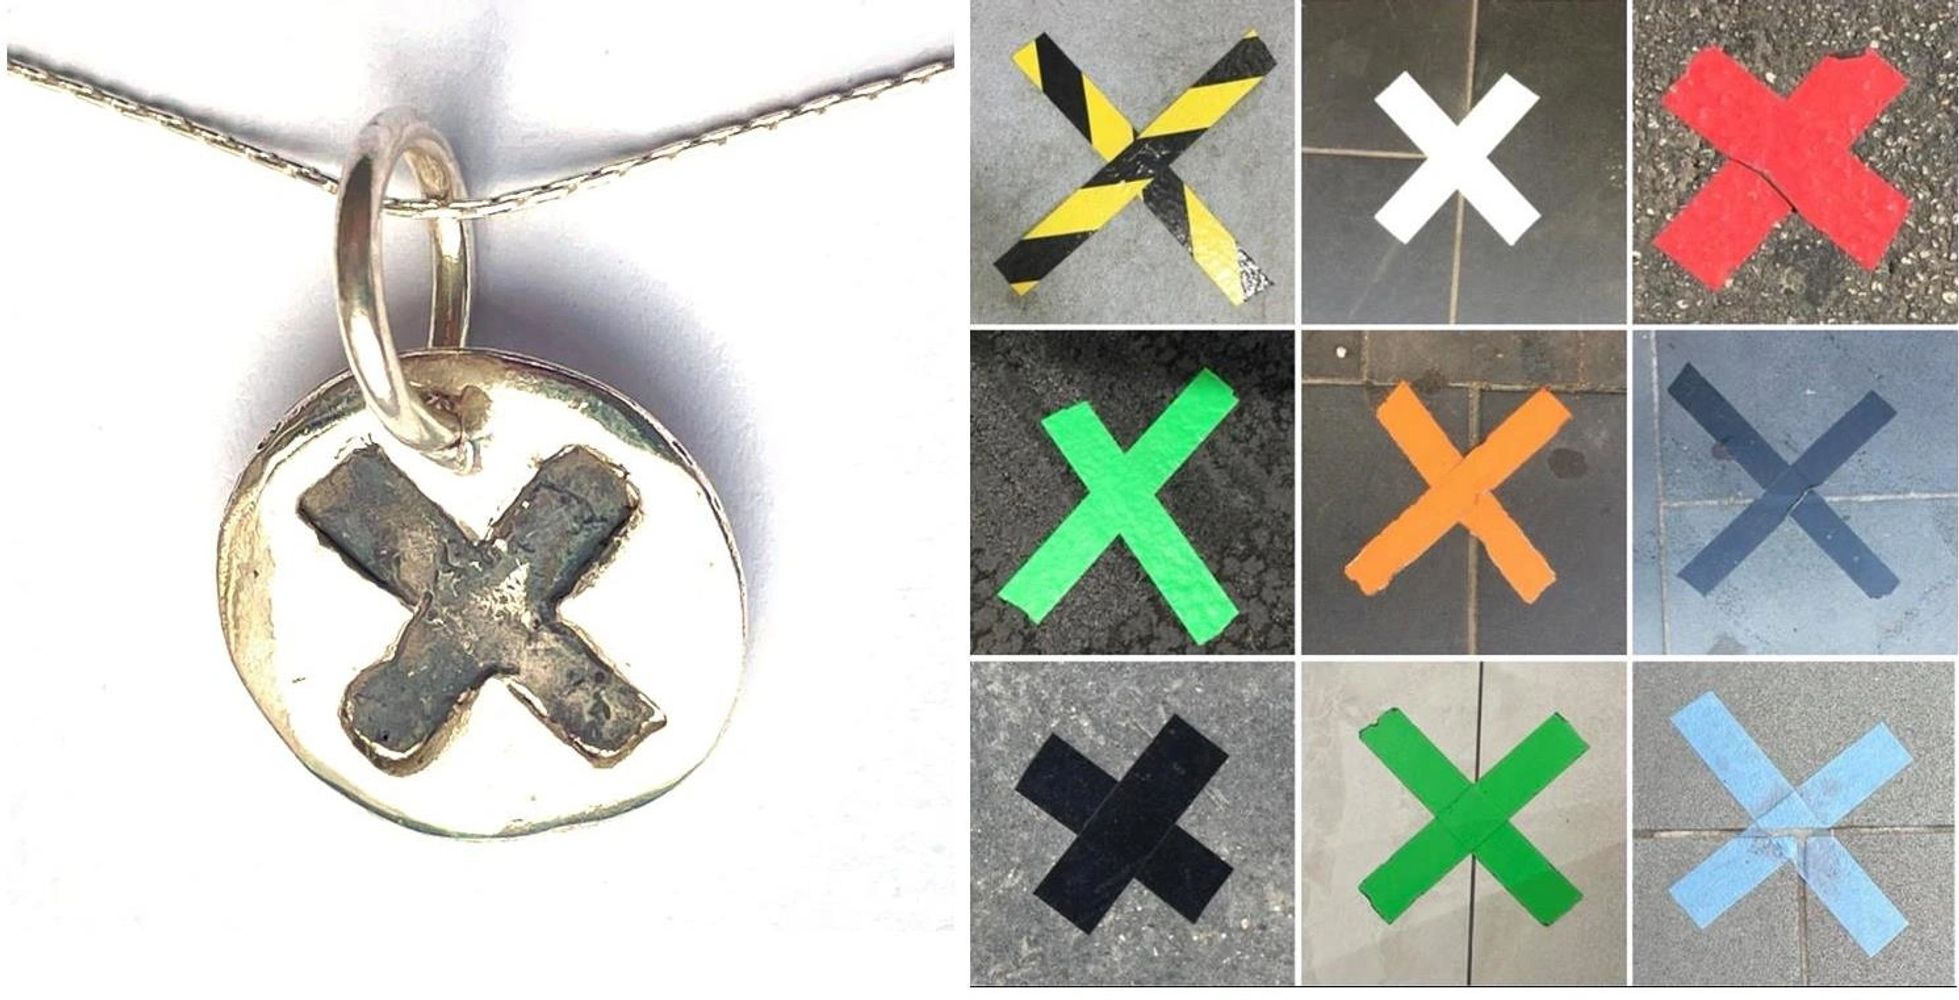 silver pendant with a black X cross and 9 crosses taped on the pavement